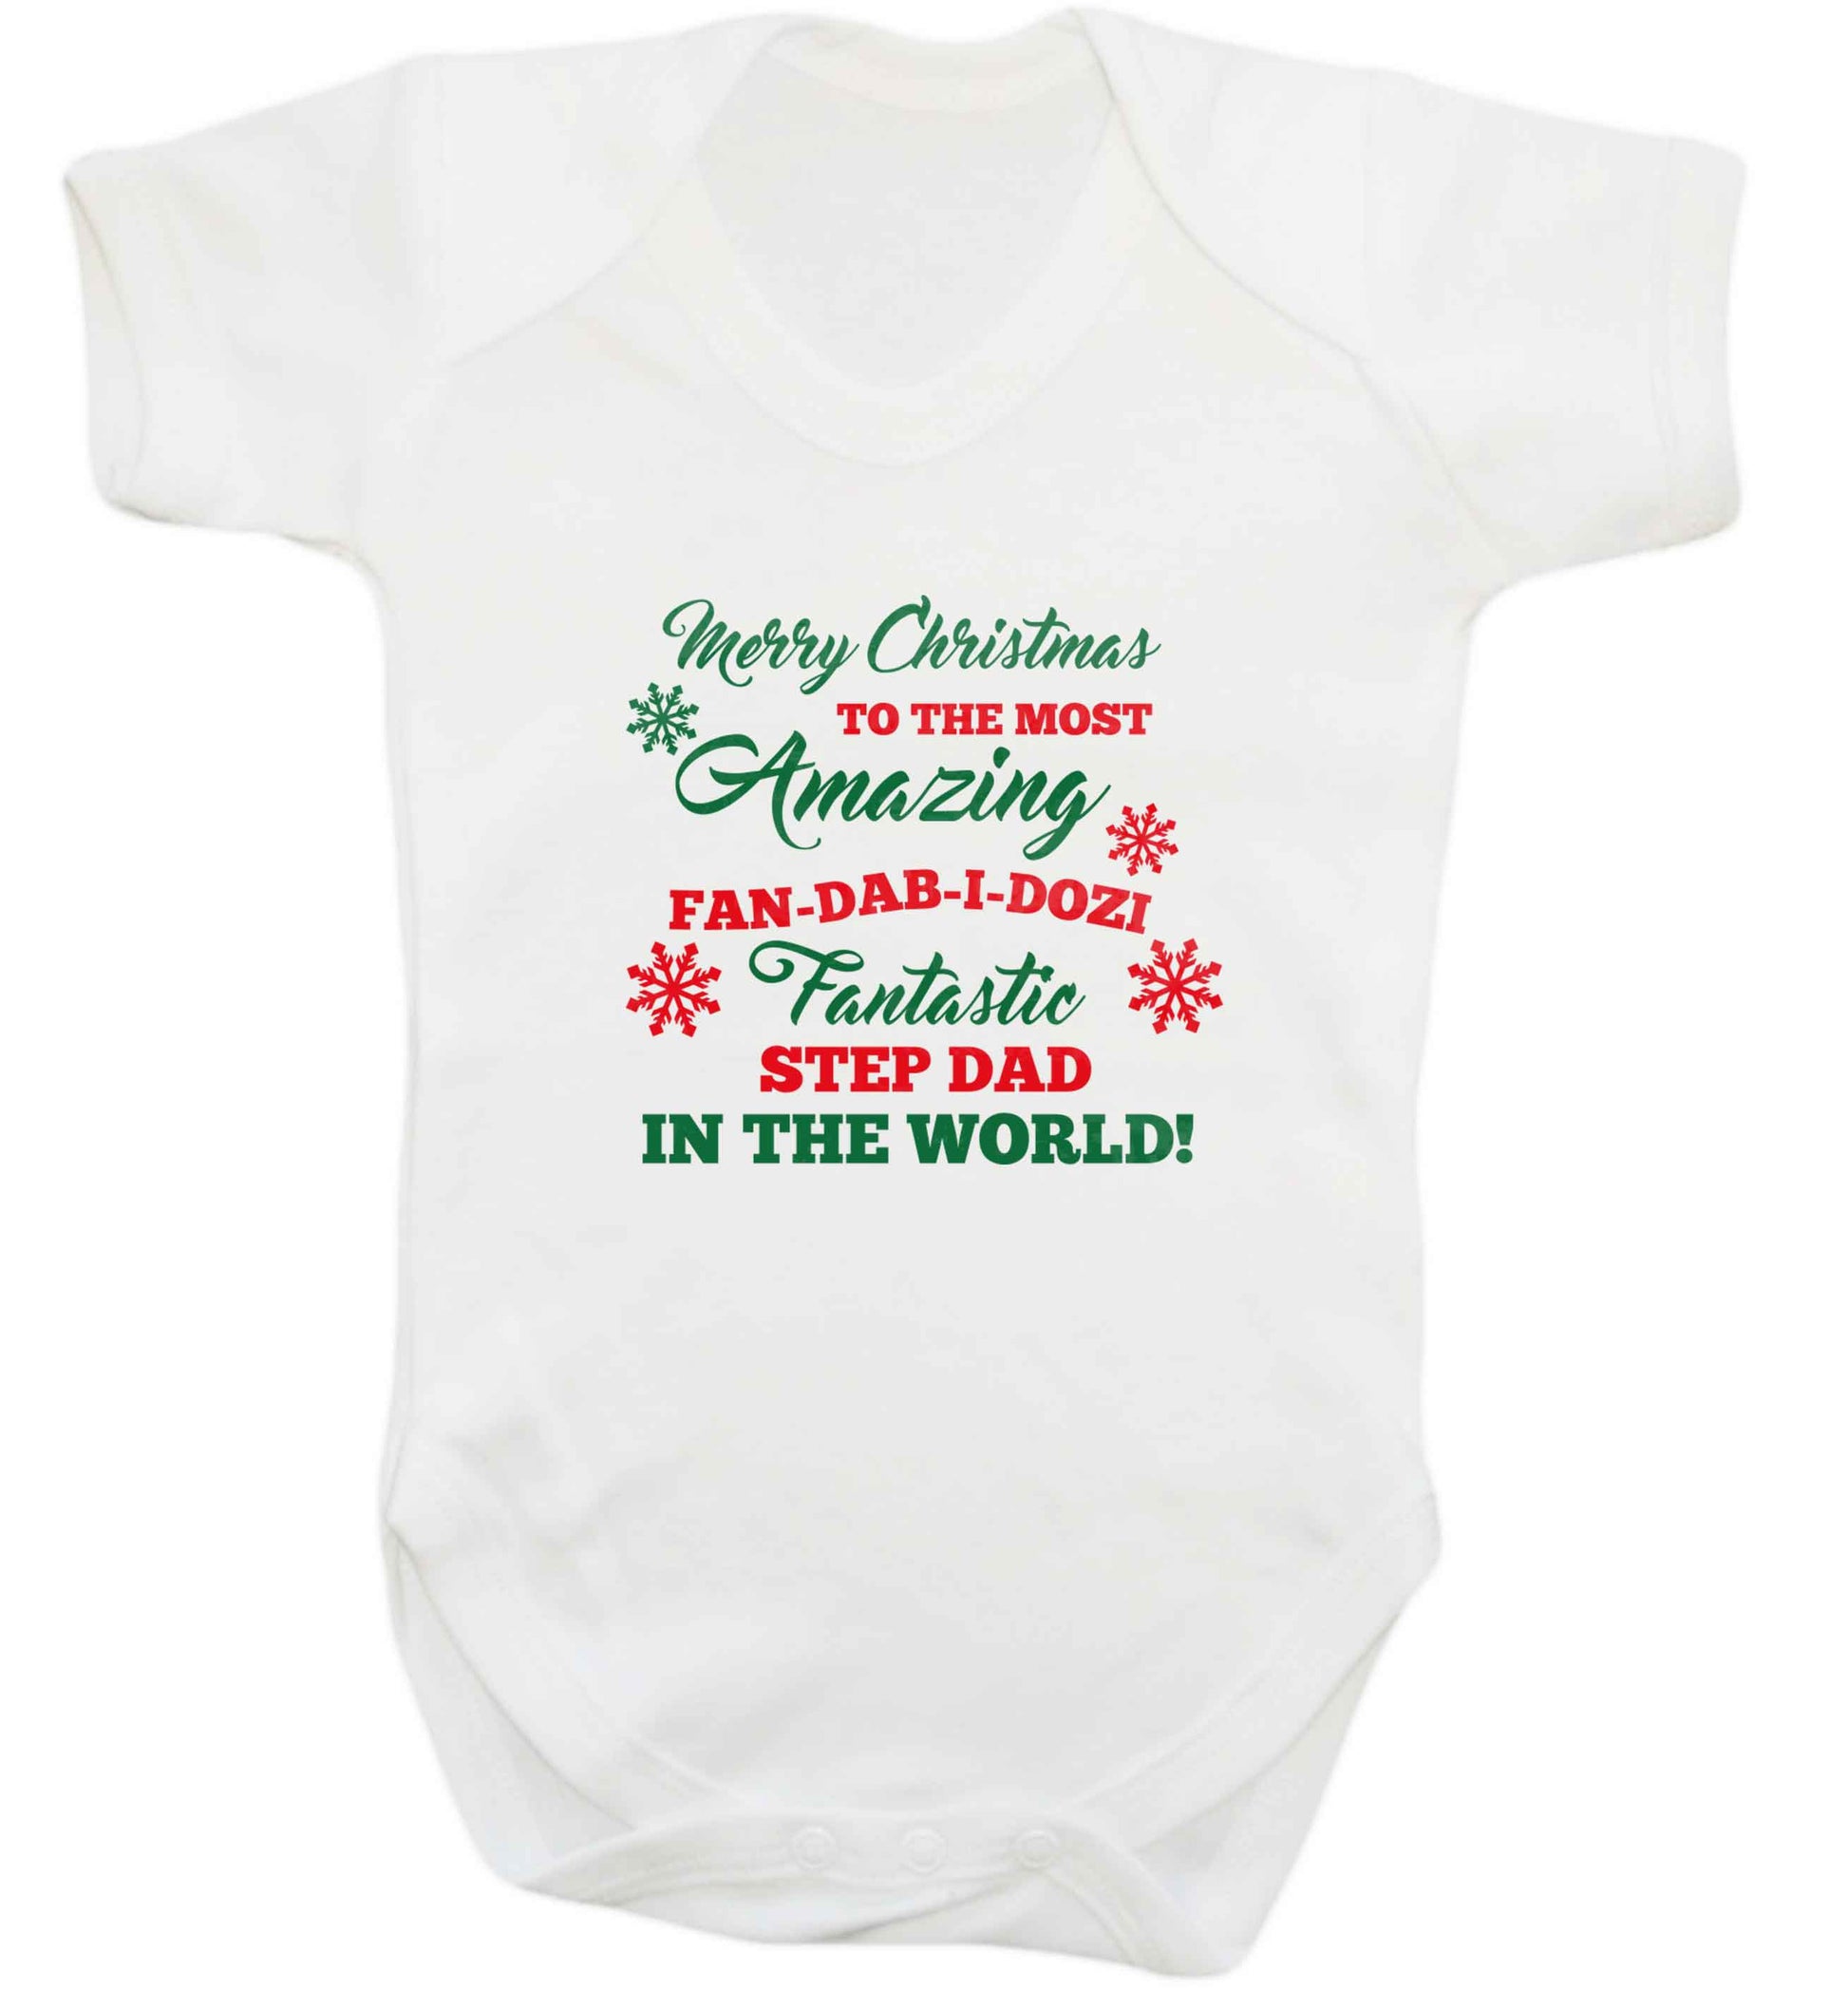 Merry Christmas to the most amazing fan-dab-i-dozi fantasic Step Dad in the world baby vest white 18-24 months